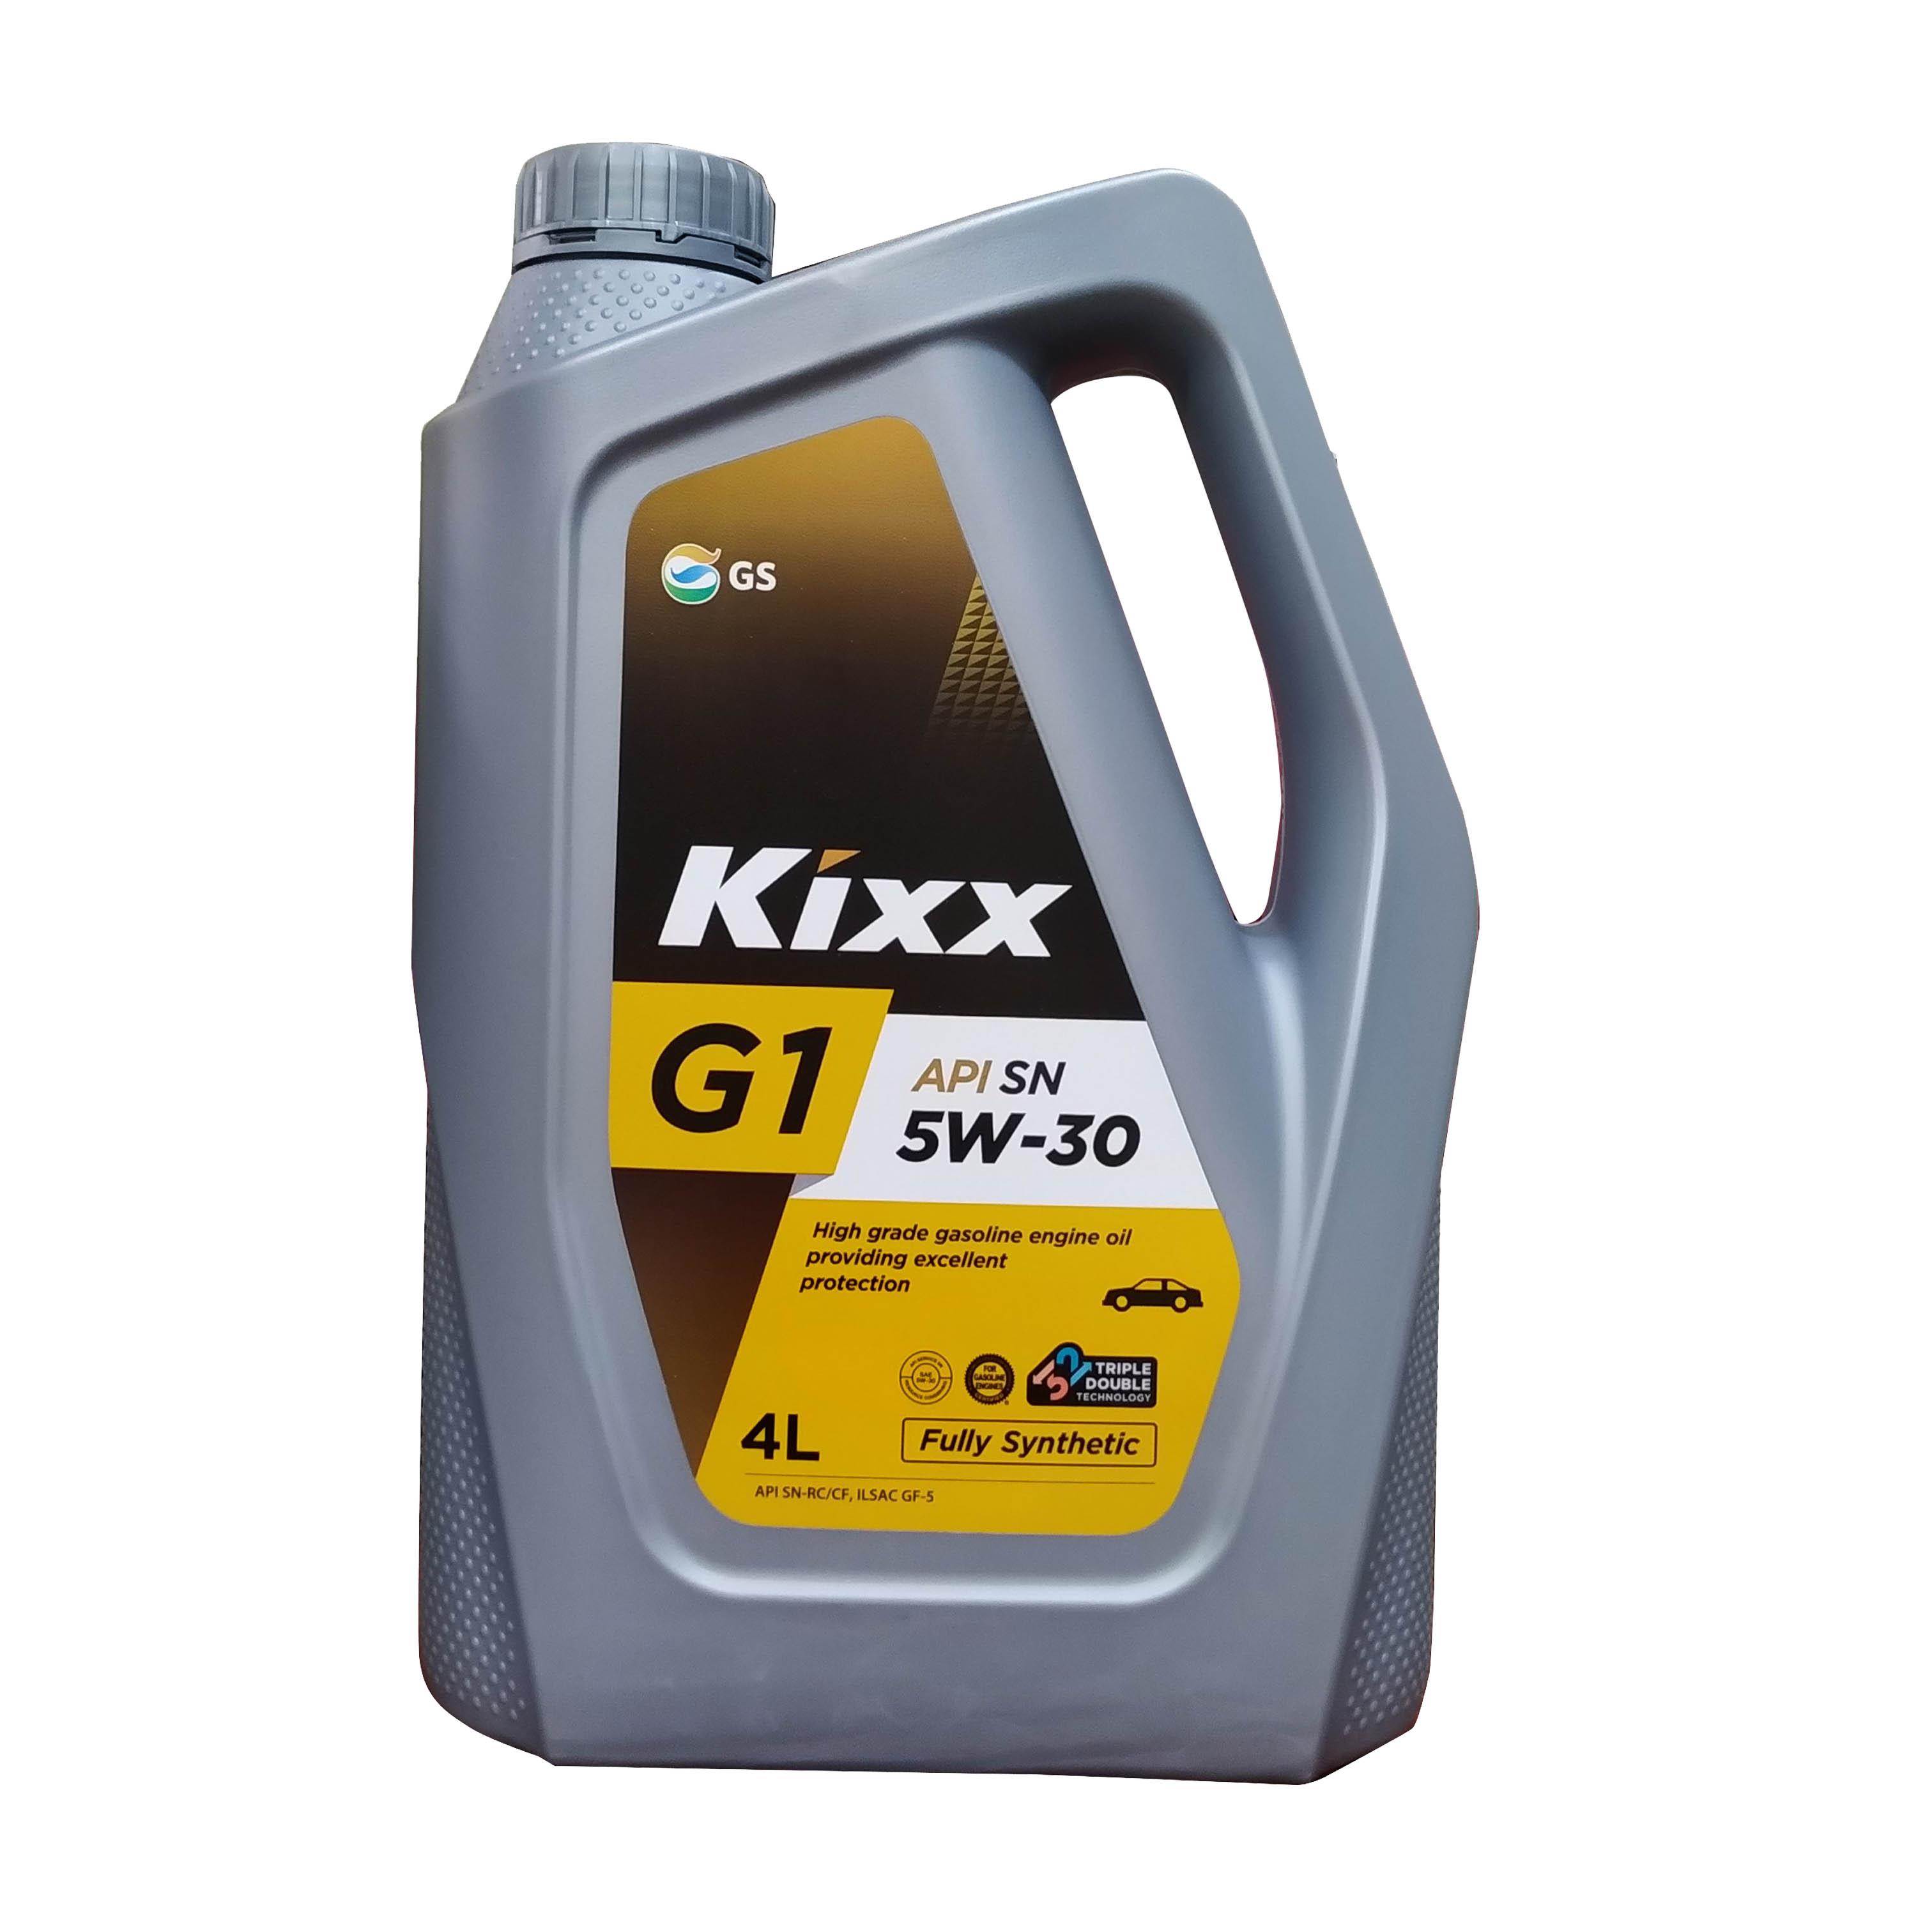 Kixx G1 5W-30 Fully Synthetic Motor Oil for Gas Engines 4L ( 4 Liters .